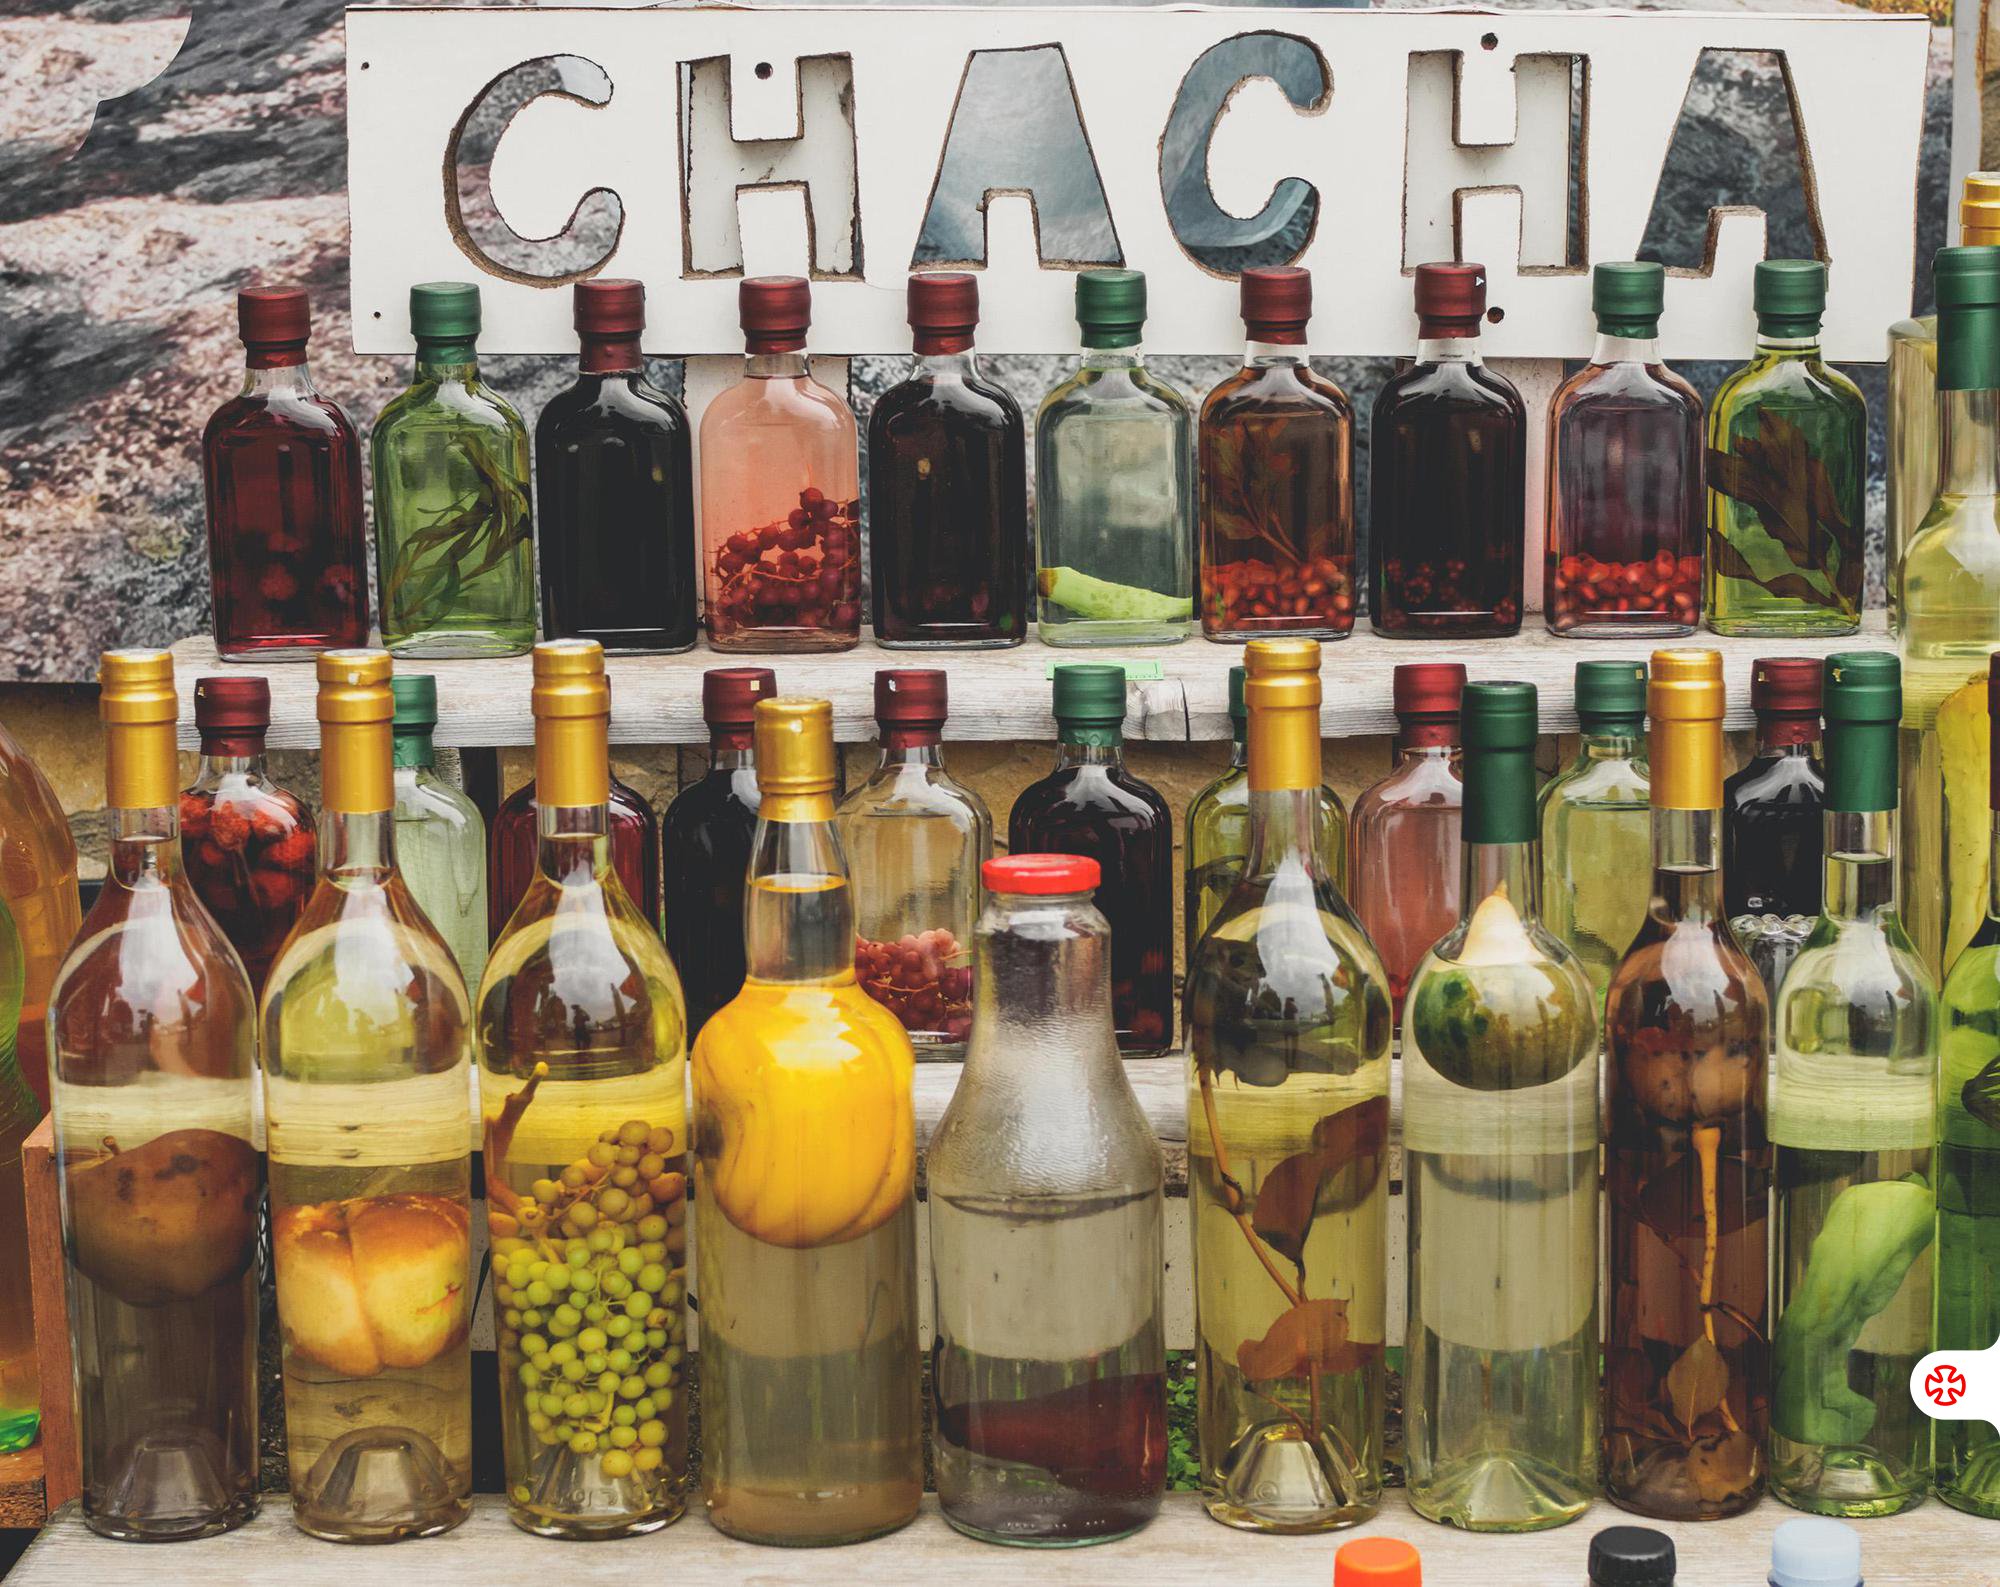 Bottles of Georgian chacha infused with fruits and herbs